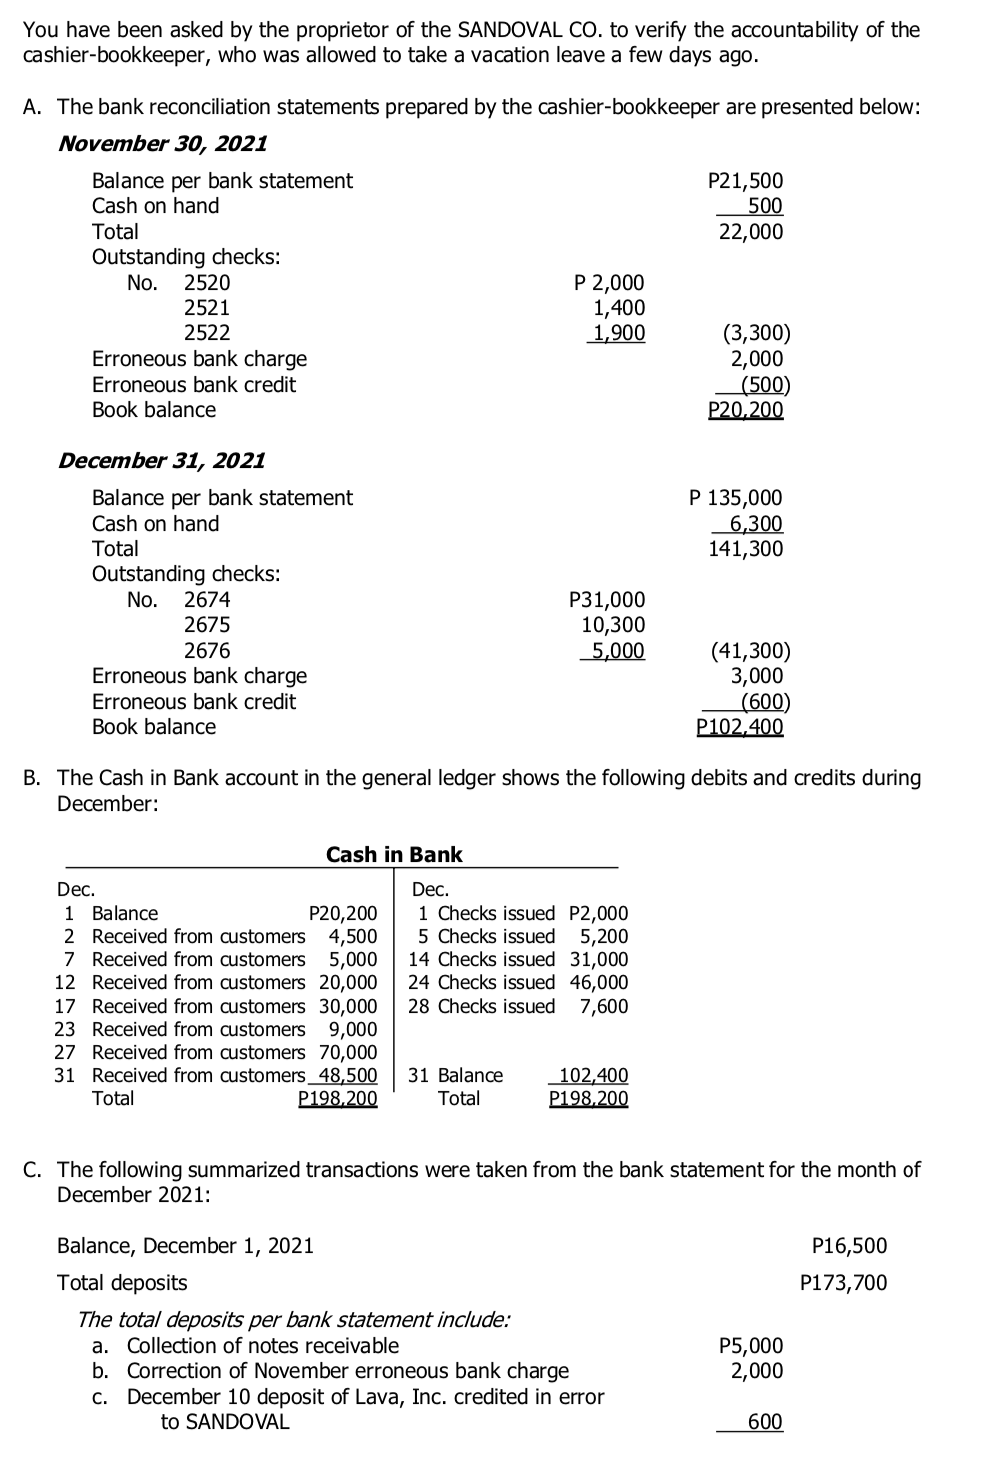 You have been asked by the proprietor of the SANDOVAL CO. to verify the accountability of the
cashier-bookkeeper, who was allowed to take a vacation leave a few days ago.
A. The bank reconciliation statements prepared by the cashier-bookkeeper are presented below:
November 30, 2021
Balance per bank statement
Cash on hand
Total
Outstanding checks:
No. 2520
2521
2522
Erroneous bank charge
Erroneous bank credit
Book balance
December 31, 2021
Balance per bank statement
Cash on hand
Total
Outstanding checks:
No. 2674
2675
2676
Erroneous bank charge
Erroneous bank credit
Book balance
P 2,000
1,400
1,900
Dec.
1 Balance
P20,200
2 Received from customers 4,500
7 Received from customers 5,000
12 Received from customers 20,000
17 Received from customers 30,000
23 Received from customers 9,000
27 Received from customers 70,000
31 Received from customers 48,500
Total
P198,200
P31,000
10,300
5,000
Cash in Bank
Dec.
1 Checks issued P2,000
5 Checks issued 5,200
14 Checks issued 31,000
24 Checks issued 46,000
28 Checks issued 7,600
31 Balance
Total
102,400
P198,200
P21,500
500
22,000
(3,300)
2,000
B. The Cash in Bank account in the general ledger shows the following debits and credits during
December:
Balance, December 1, 2021
Total deposits
The total deposits per bank statement include:
a. Collection of notes receivable
b. Correction of November erroneous bank charge
c. December 10 deposit of Lava, Inc. credited in error
to SANDOVAL
(500)
P20,200
P 135,000
6,300
141,300
(41,300)
3,000
(600)
P102,400
C. The following summarized transactions were taken from the bank statement for the month of
December 2021:
P5,000
2,000
600
P16,500
P173,700